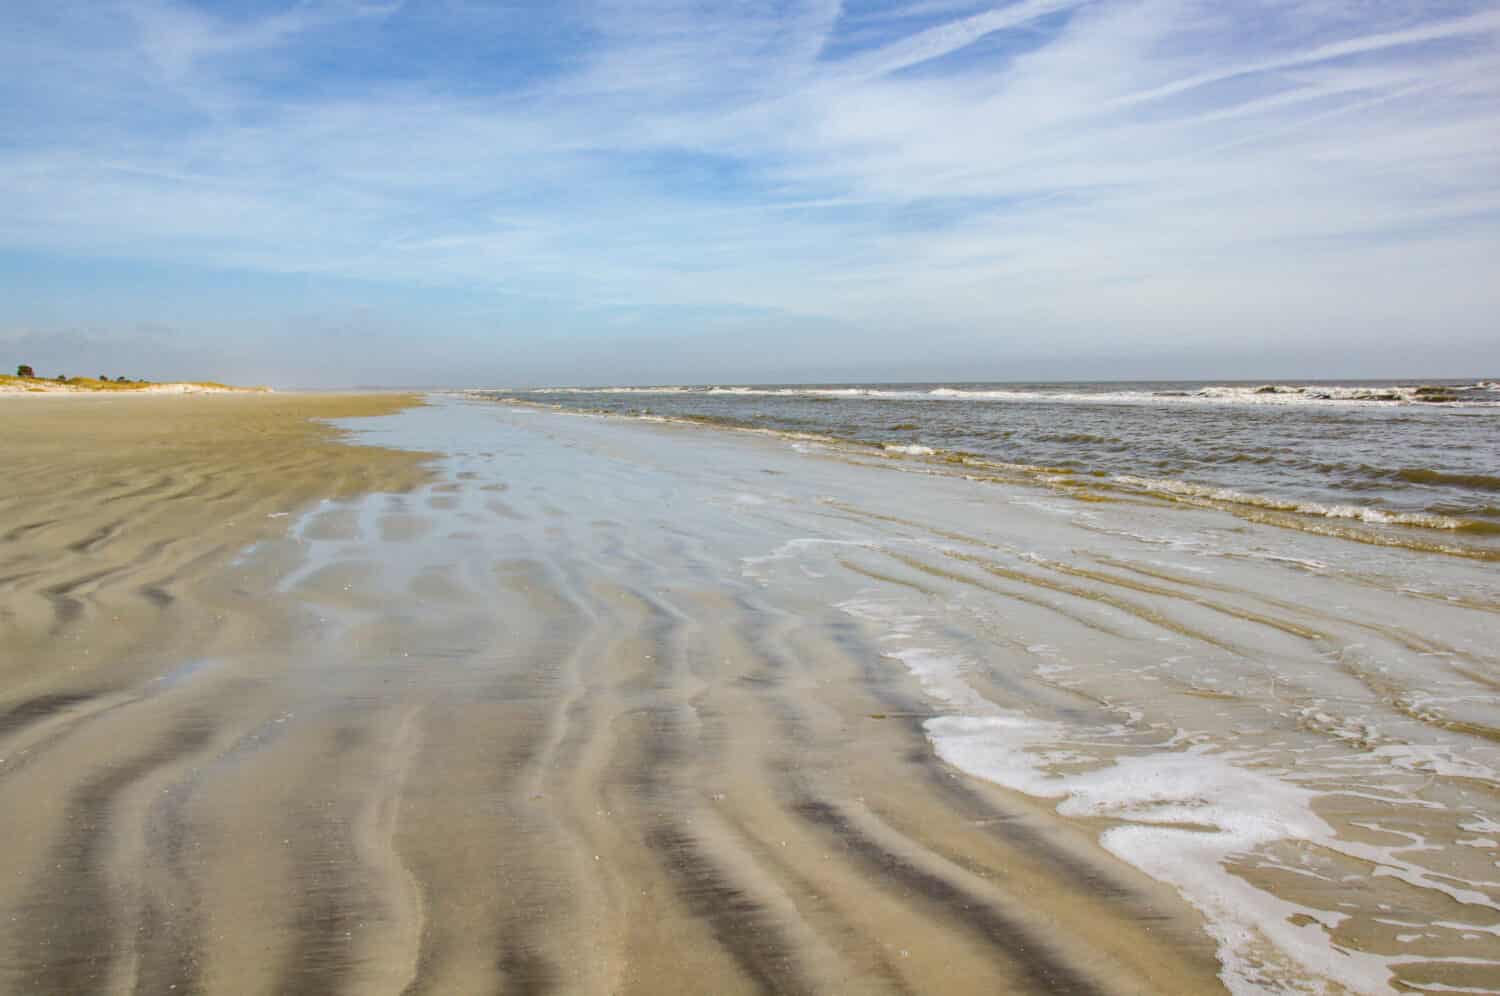 A beach without any people.  The gentle waves roll in on the rippled sand on Sapelo Island, SC.